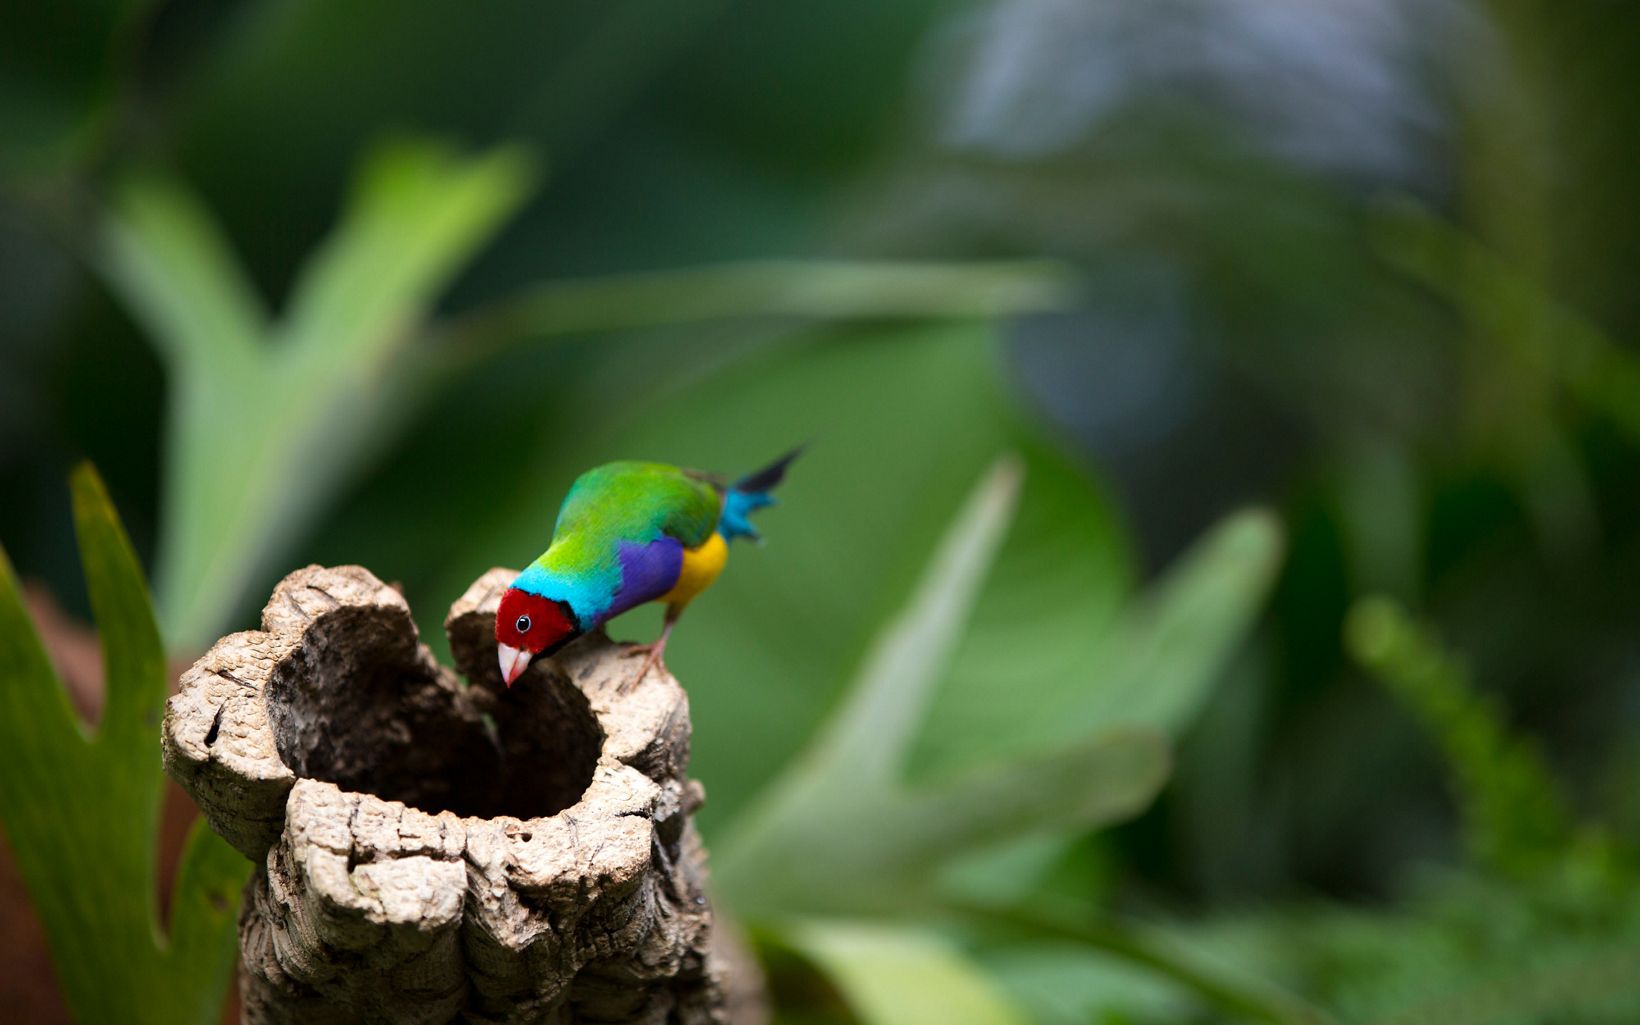 or the rainbow finch, is a colourful passerine bird native to Australia.